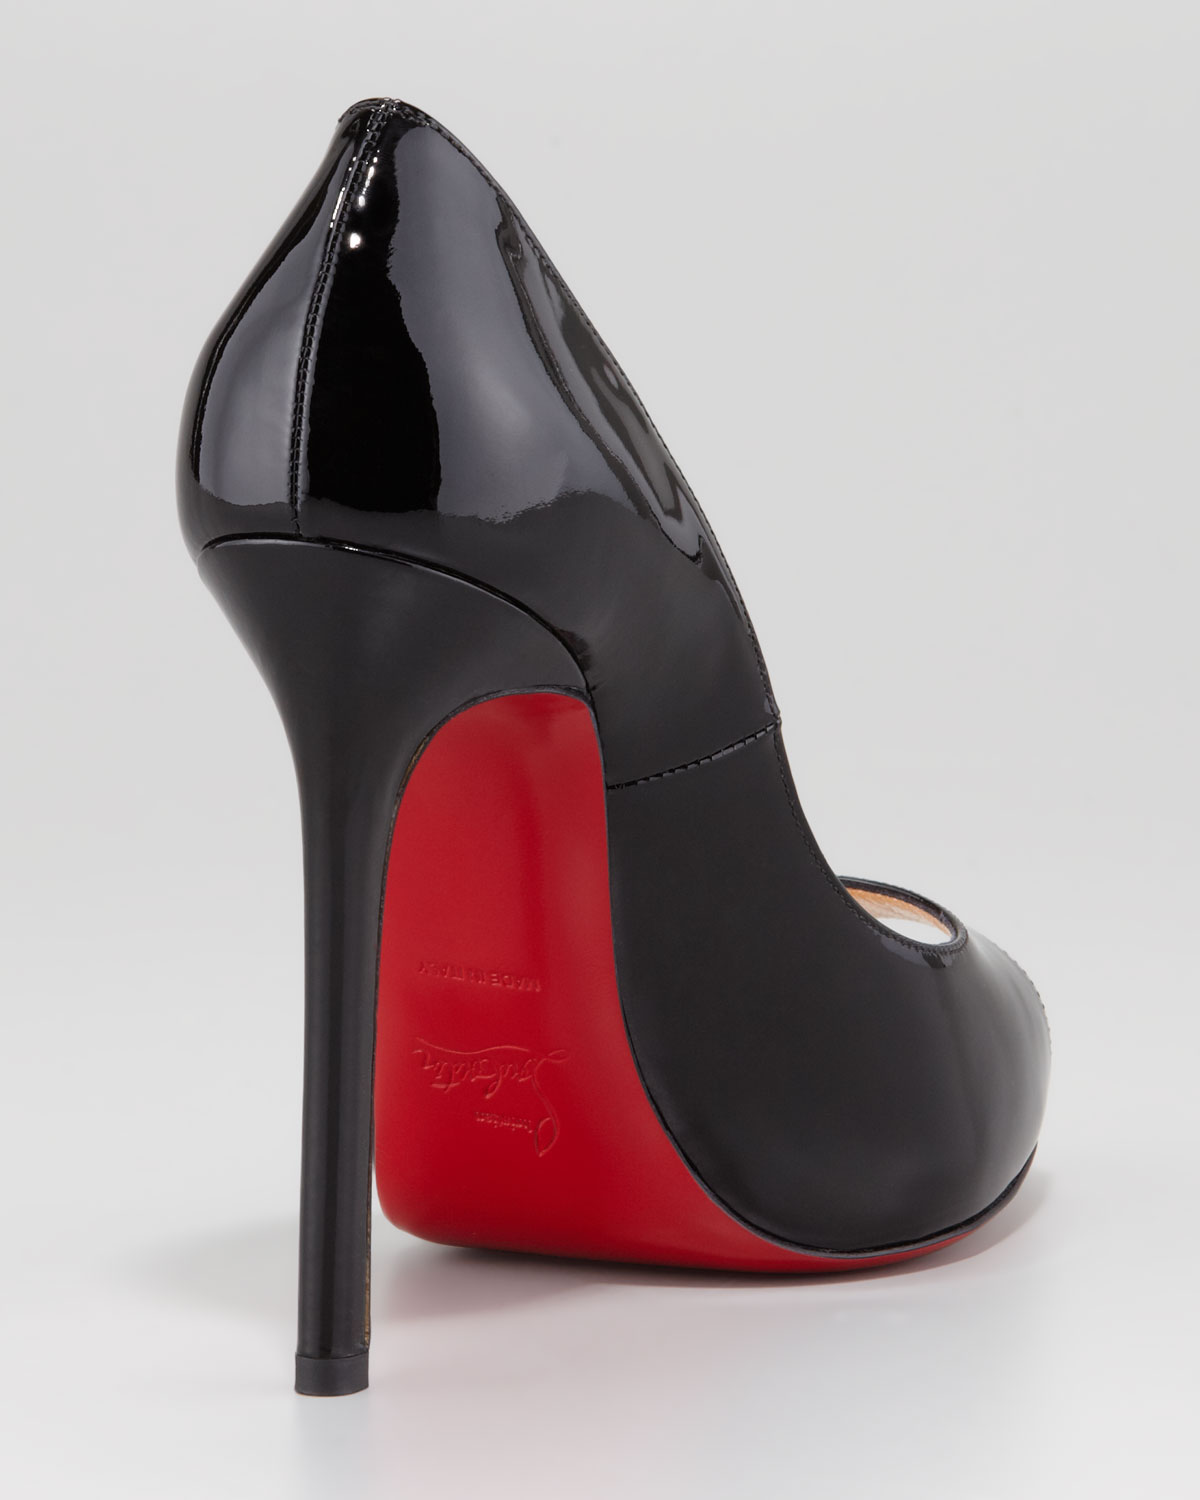 Christian louboutin Flo Patent Leather Red Sole Peeptoe Pump in Black ...